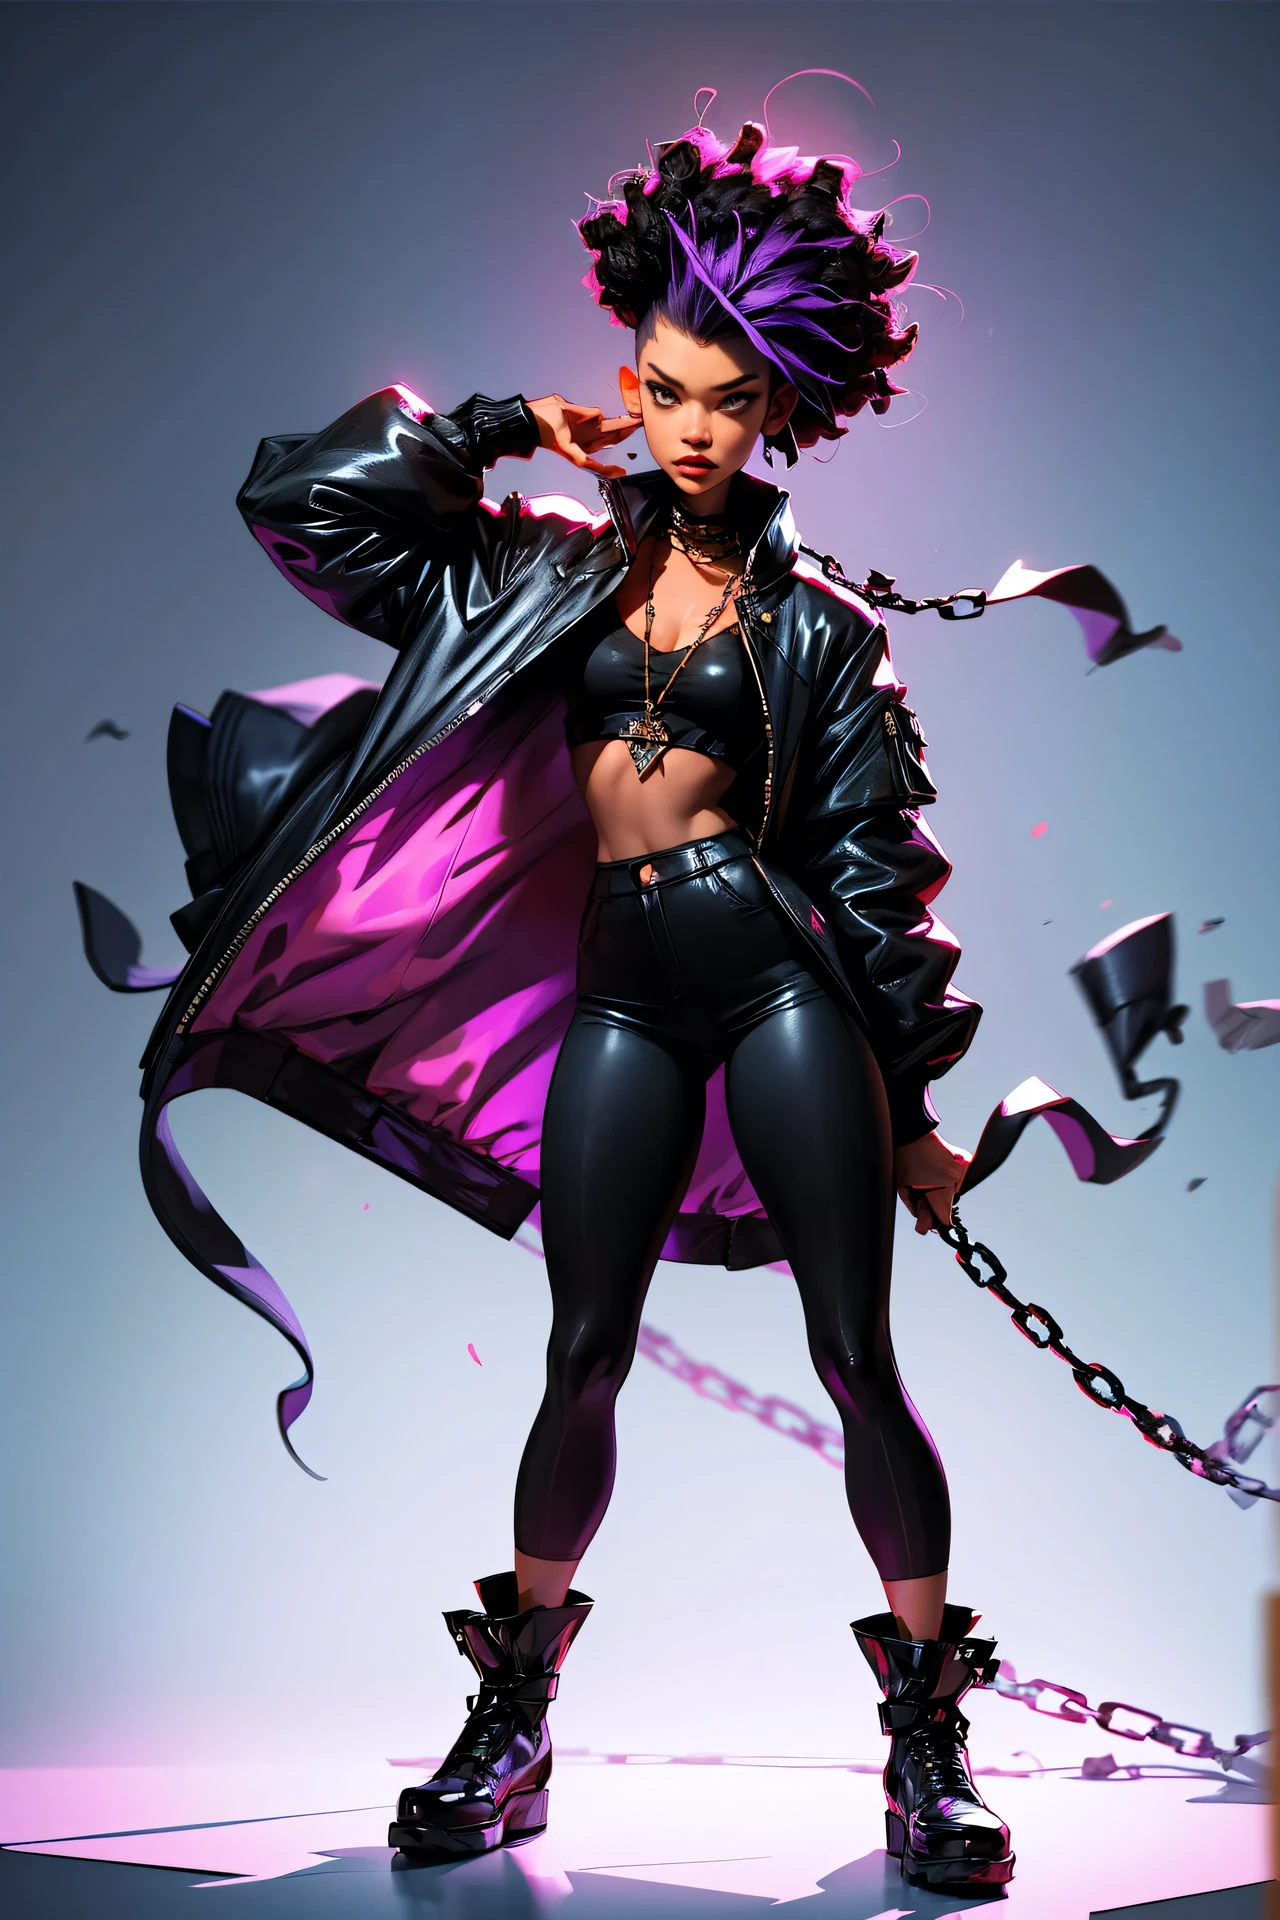 models, professional:1.6(best quality,4k,8k,highres,masterpiece:1.2),ultra-detailed,realistic,punk style,punk fashion,full body shot:1.5,general shot:1.5, rebellious,spiked clothing,chain accessories, rebellious pose,high mohawk,violet hair,colorful,edgy background,studio lighting,dynamic pose y elegamte